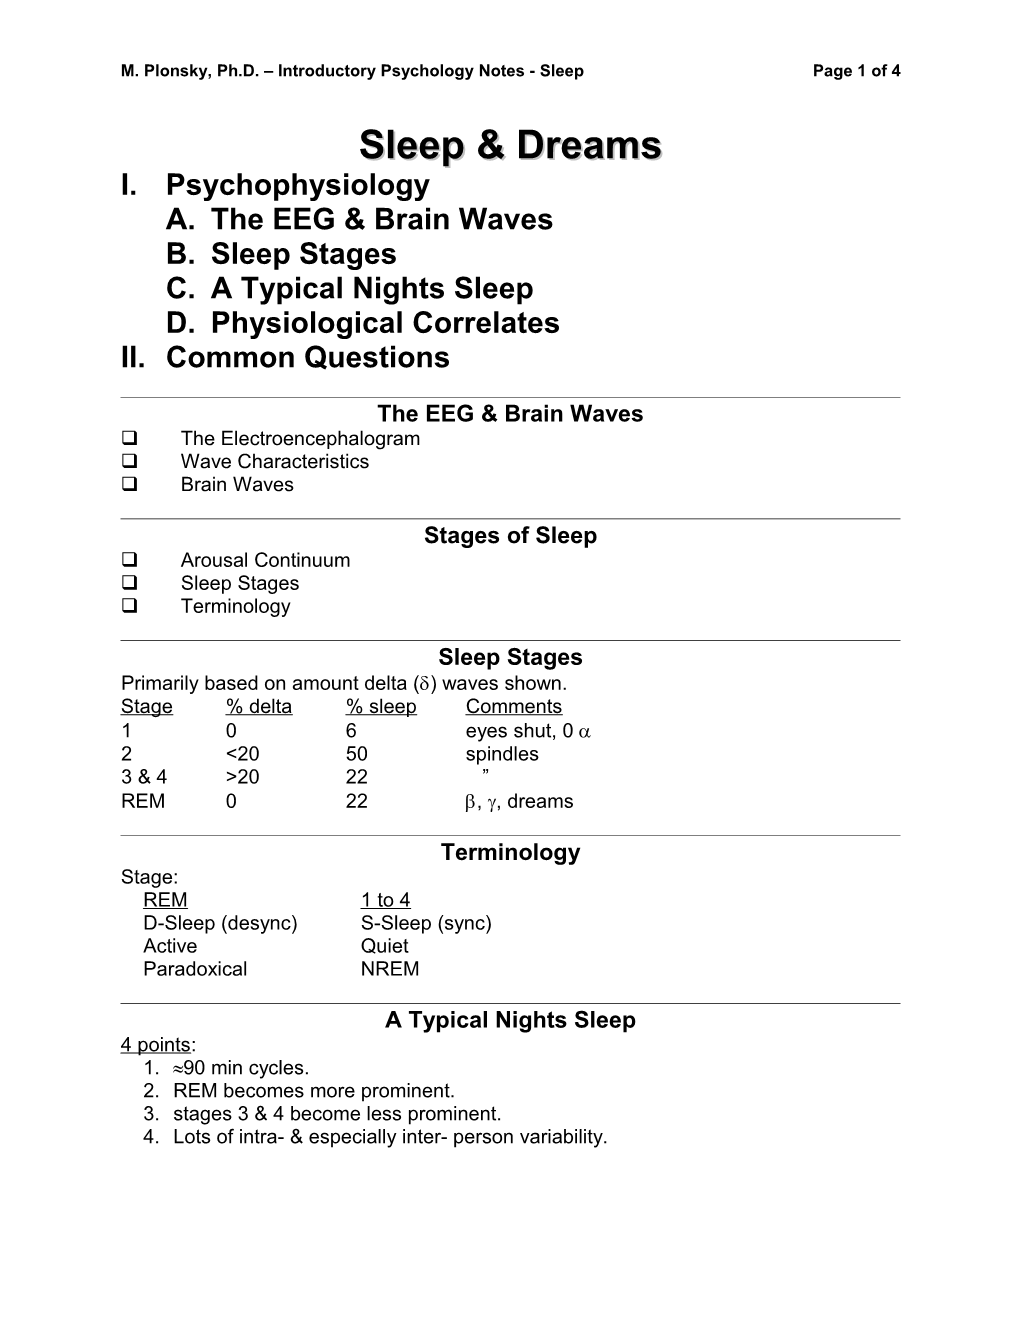 M. Plonsky, Ph.D. Introductory Psychology Notes - Sleep Page 1 of 4